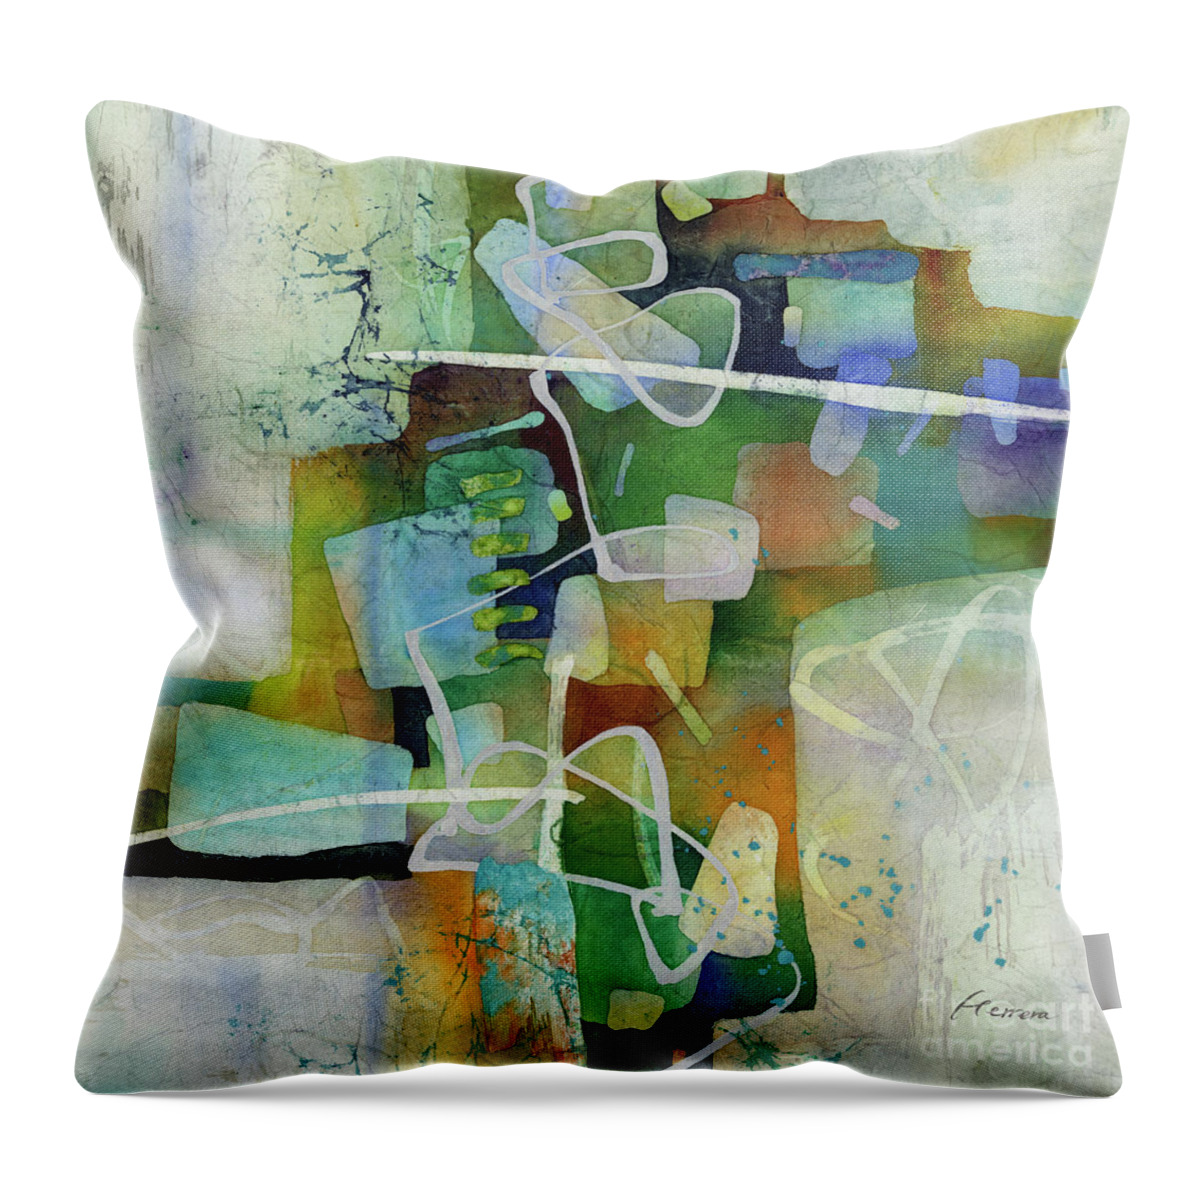 Abstract Throw Pillow featuring the painting Desert Pueblo - Green by Hailey E Herrera